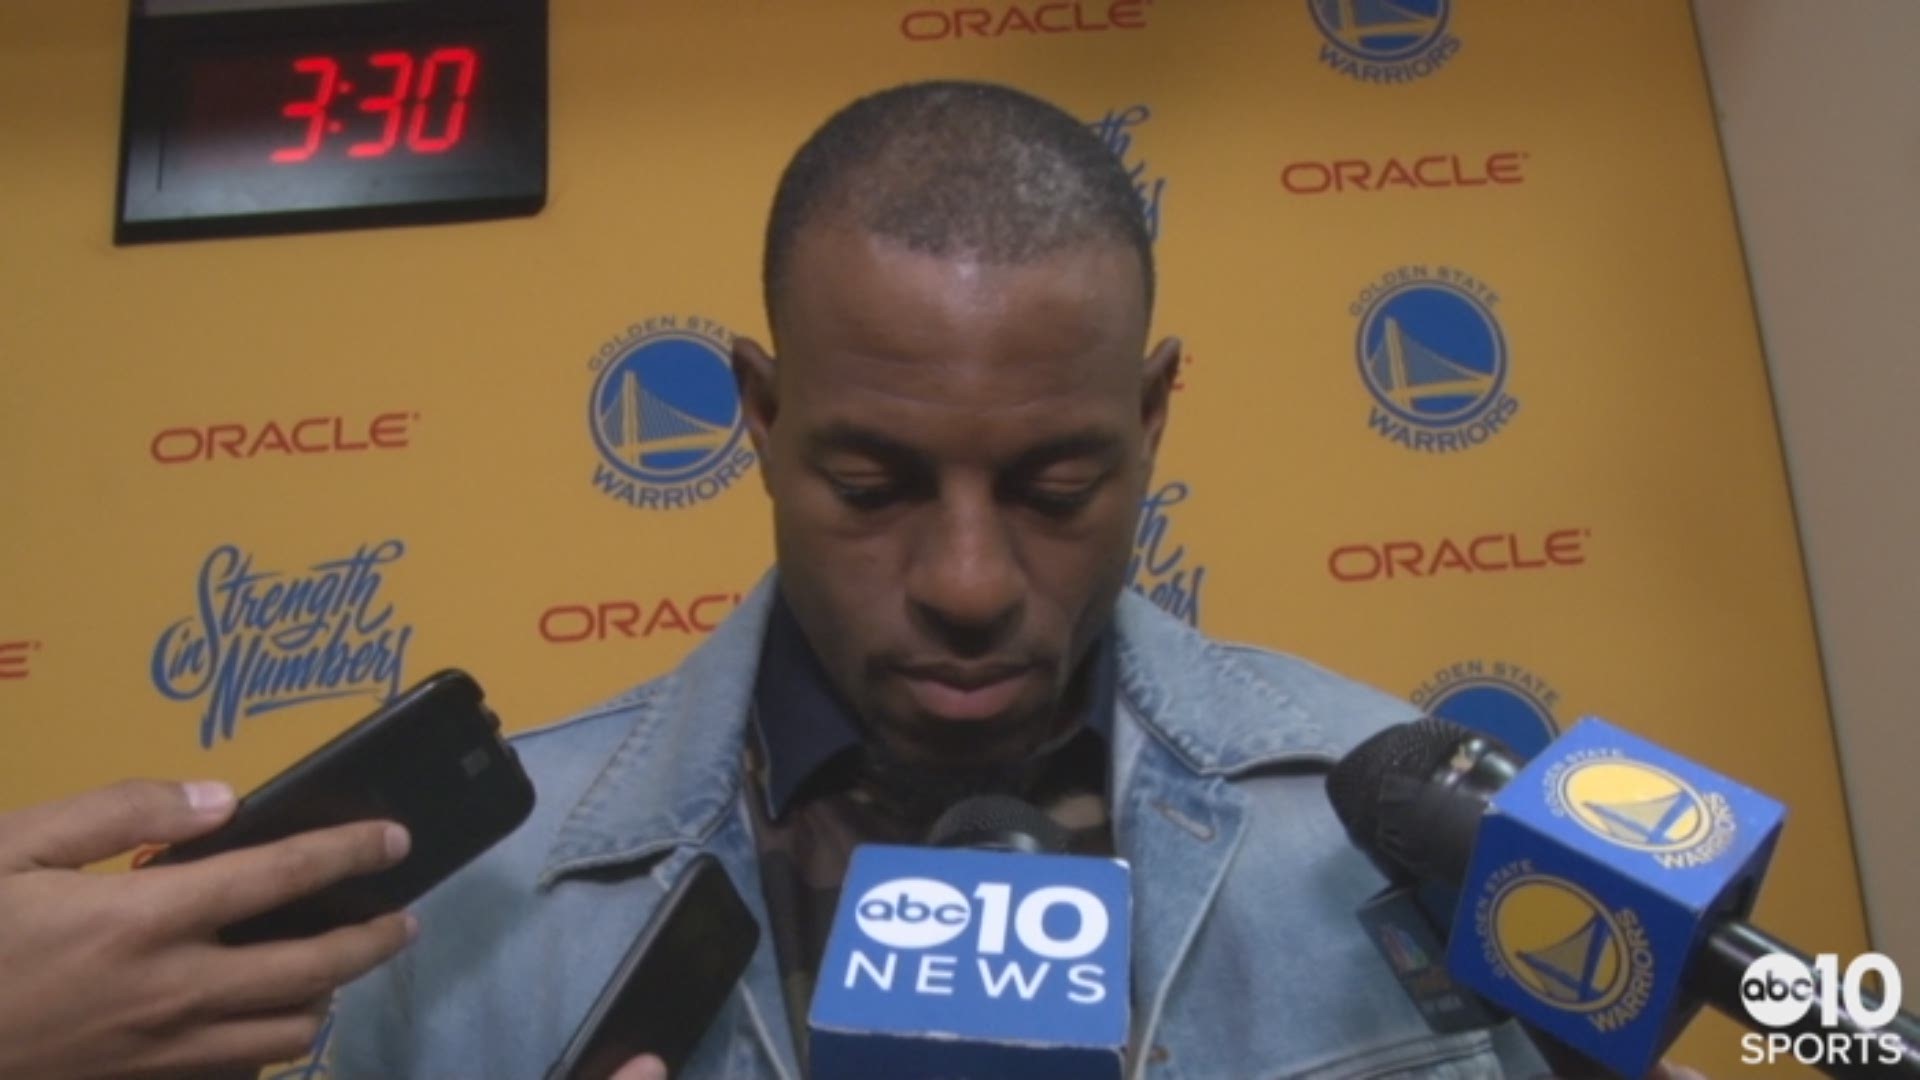 Warriors forward Andre Iguodala talked about Saturday's win over the San Antonio Spurs in game 1 of their Western Conference playoff matchup, getting a starting role in the game and the defensive performance of his Golden State team.